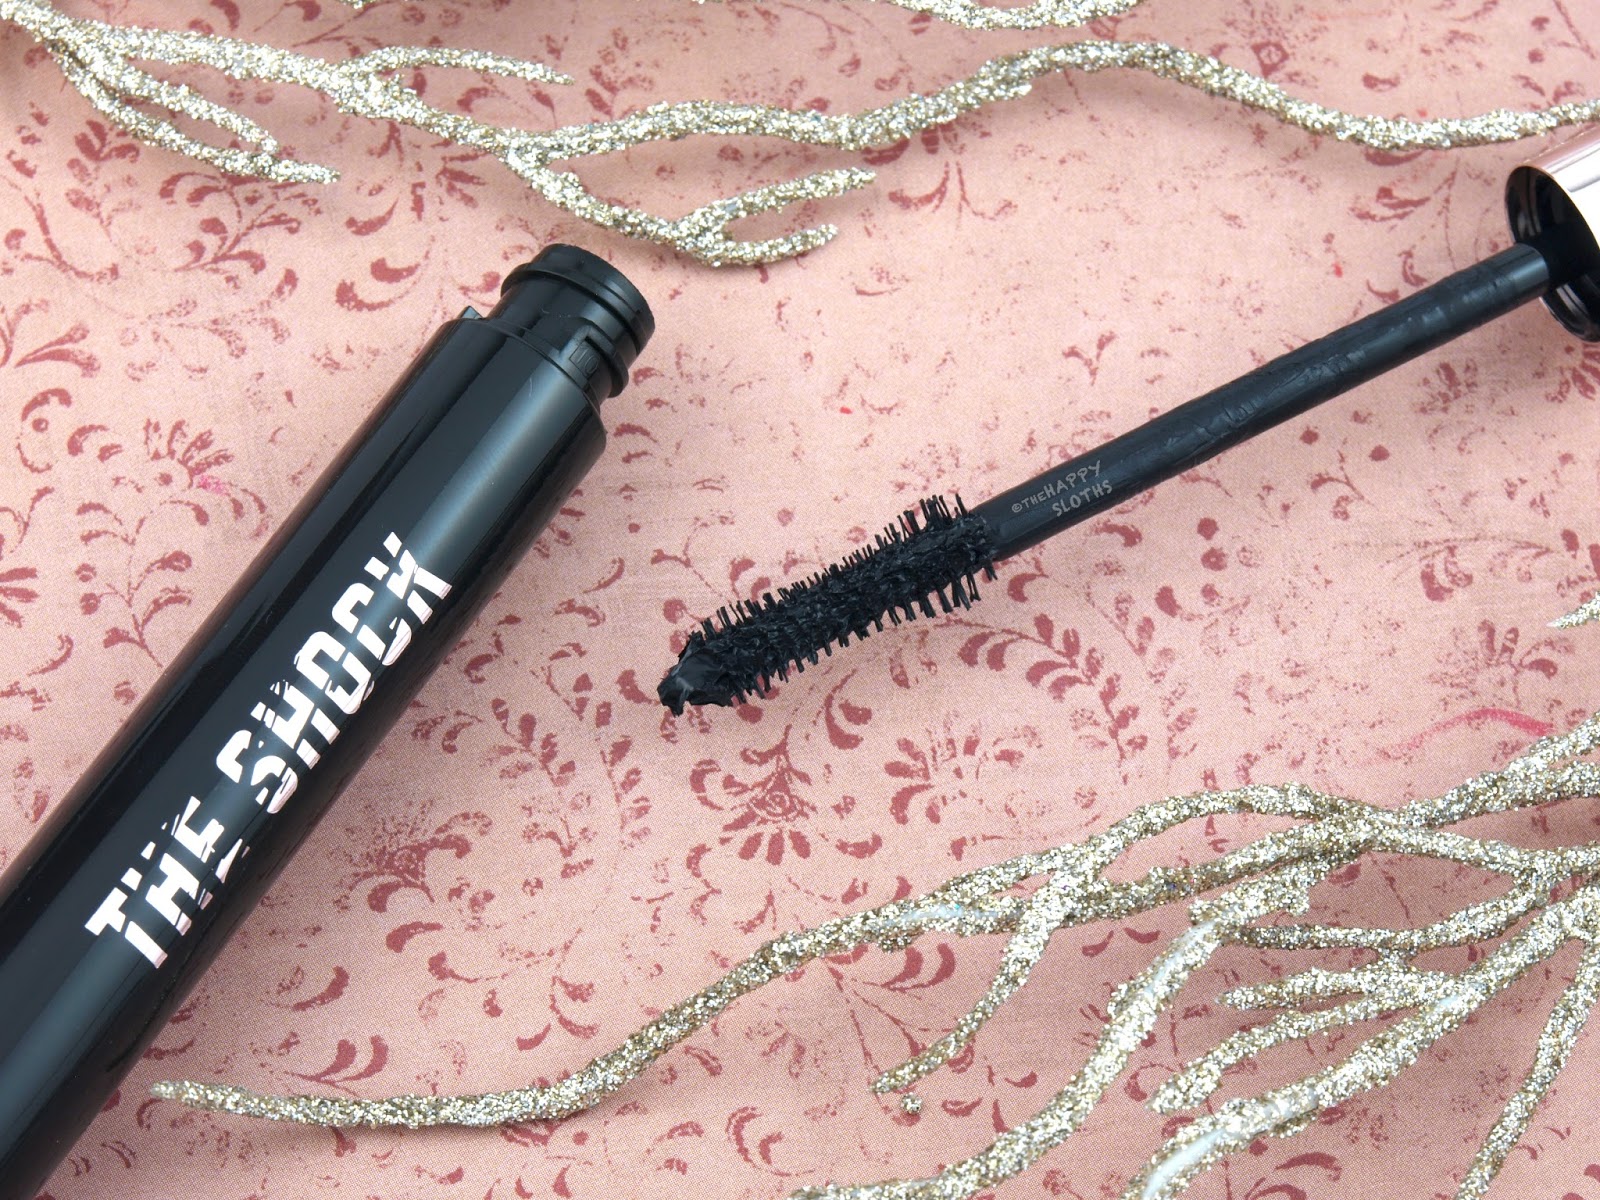 Yves Saint Laurent The Shock Volumizing Mascara: Review and Swatches | The Happy Sloths: Beauty, Makeup, Skincare Blog with Reviews and Swatches